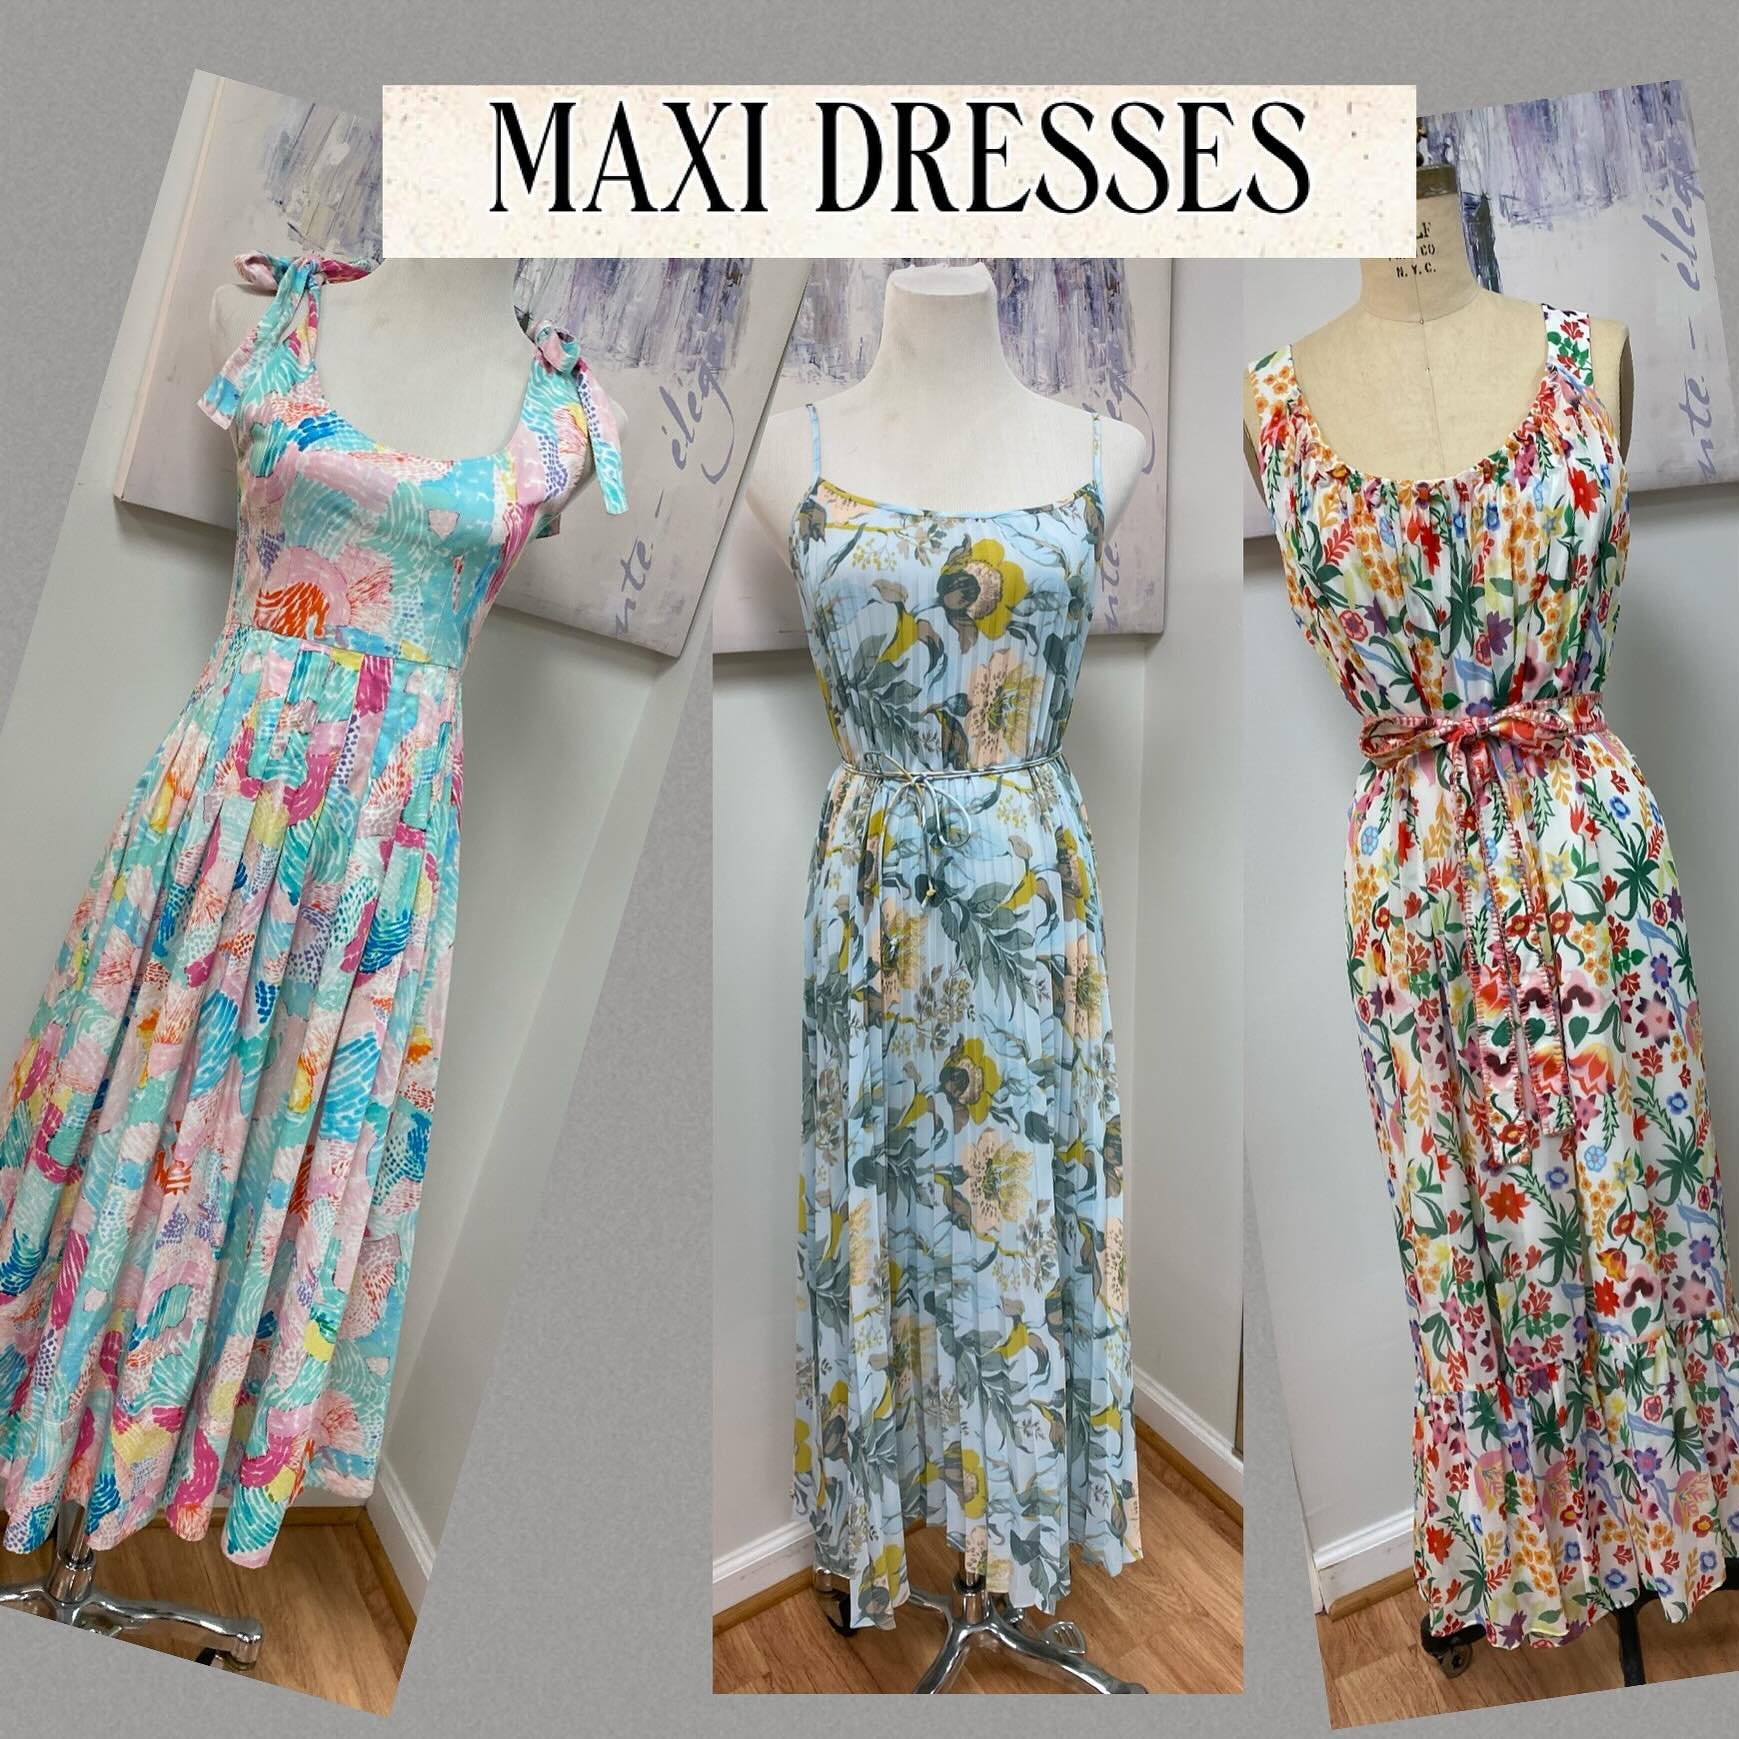 Some many choices for Maxi Dresses! Hunter Bell-Saloni-Vince. These are some of the florals. 💐#maxidresses #consignmentboutique #shoplocal #redeuxapparel #maxidresses